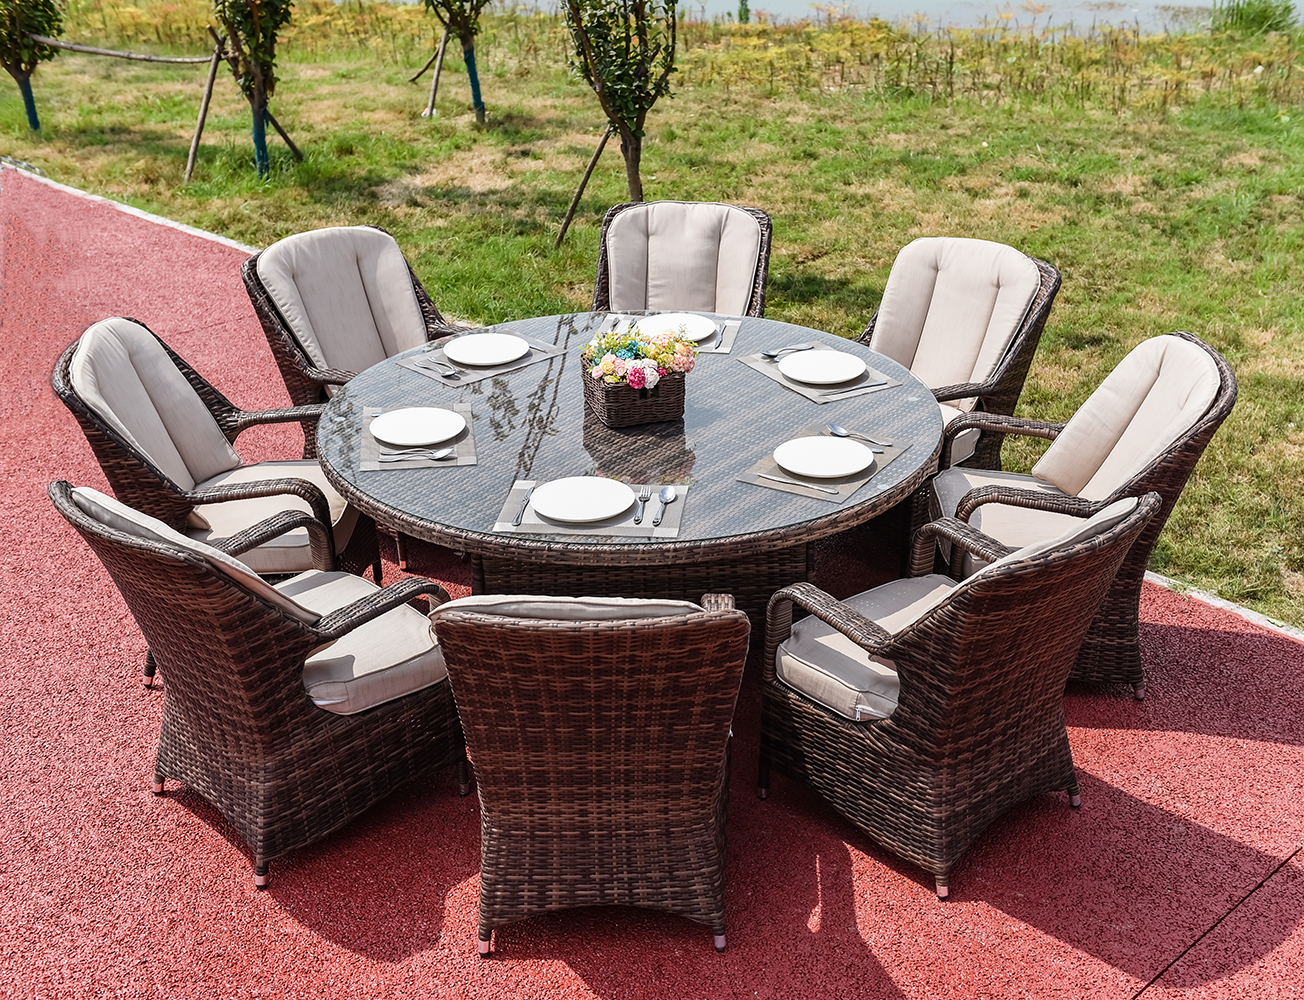 Wicker Dining Set Round Table 8 Chairs, Round Outdoor Dining Table Set For 8